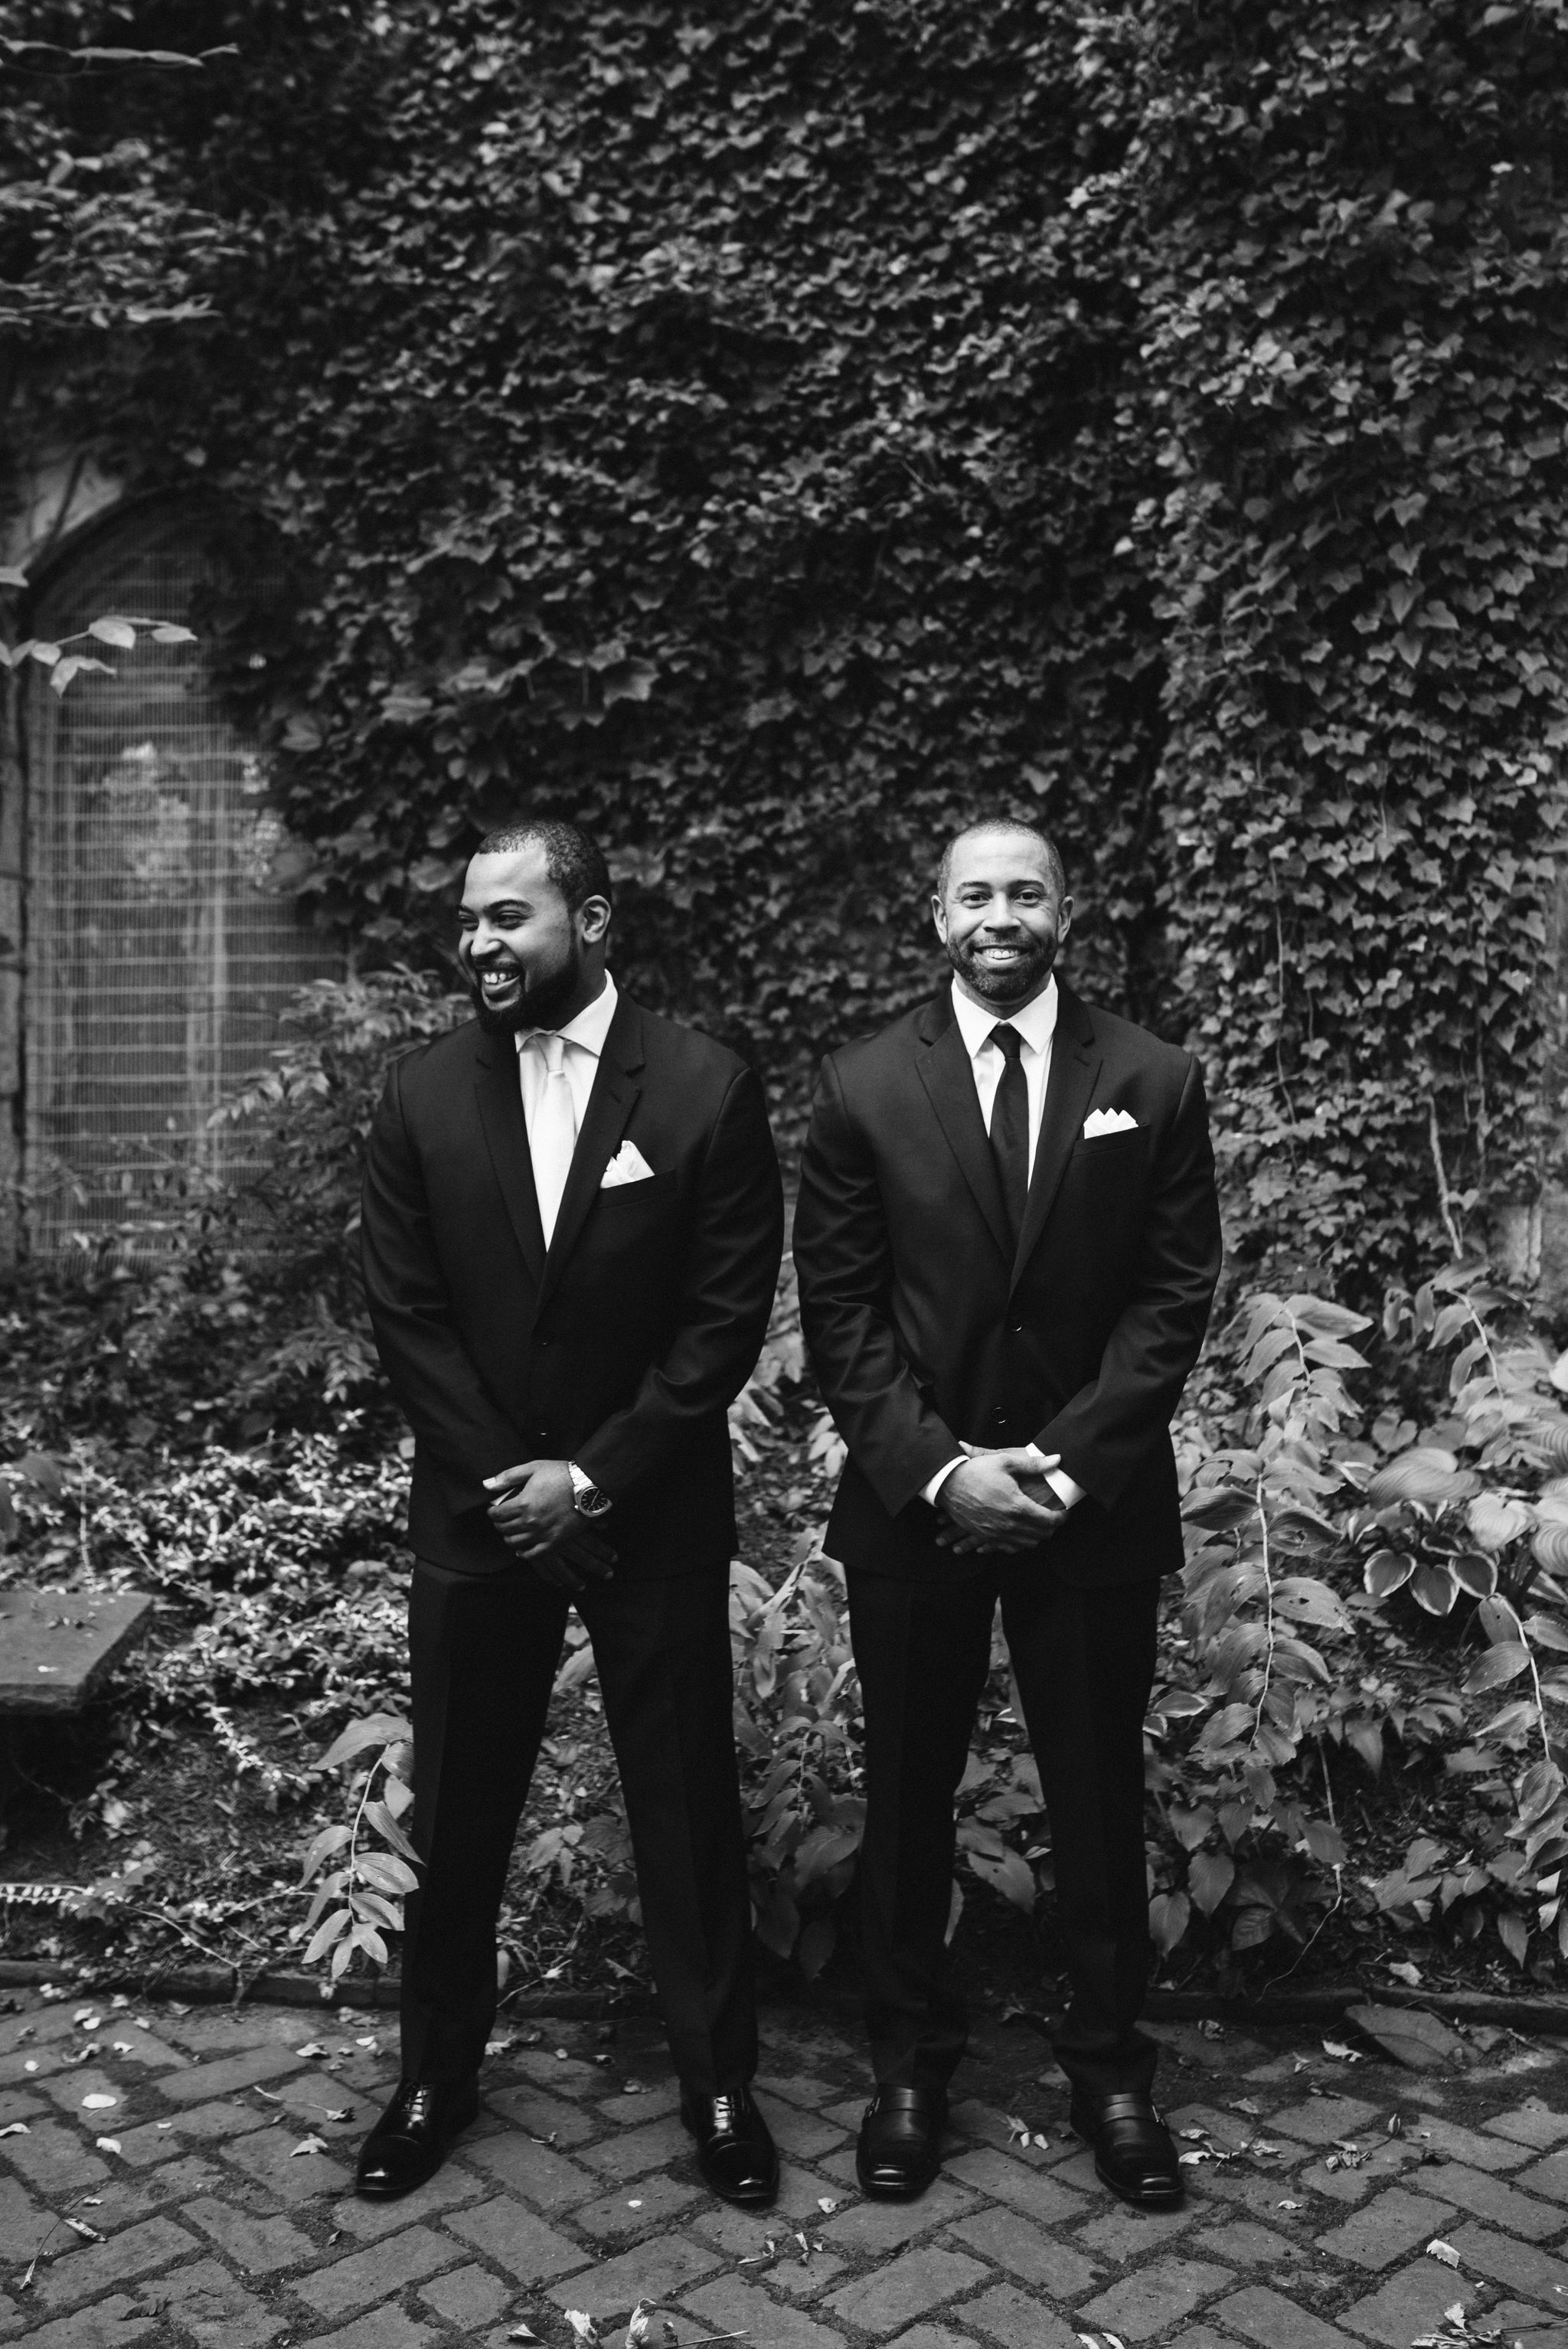  Baltimore, Maryland Wedding Photographer, Mount Vernon, Chase Court, Classic, Outdoor Ceremony, Garden, Romantic, Portrait of Groom and Best Man Smiling, Black and White Photo 